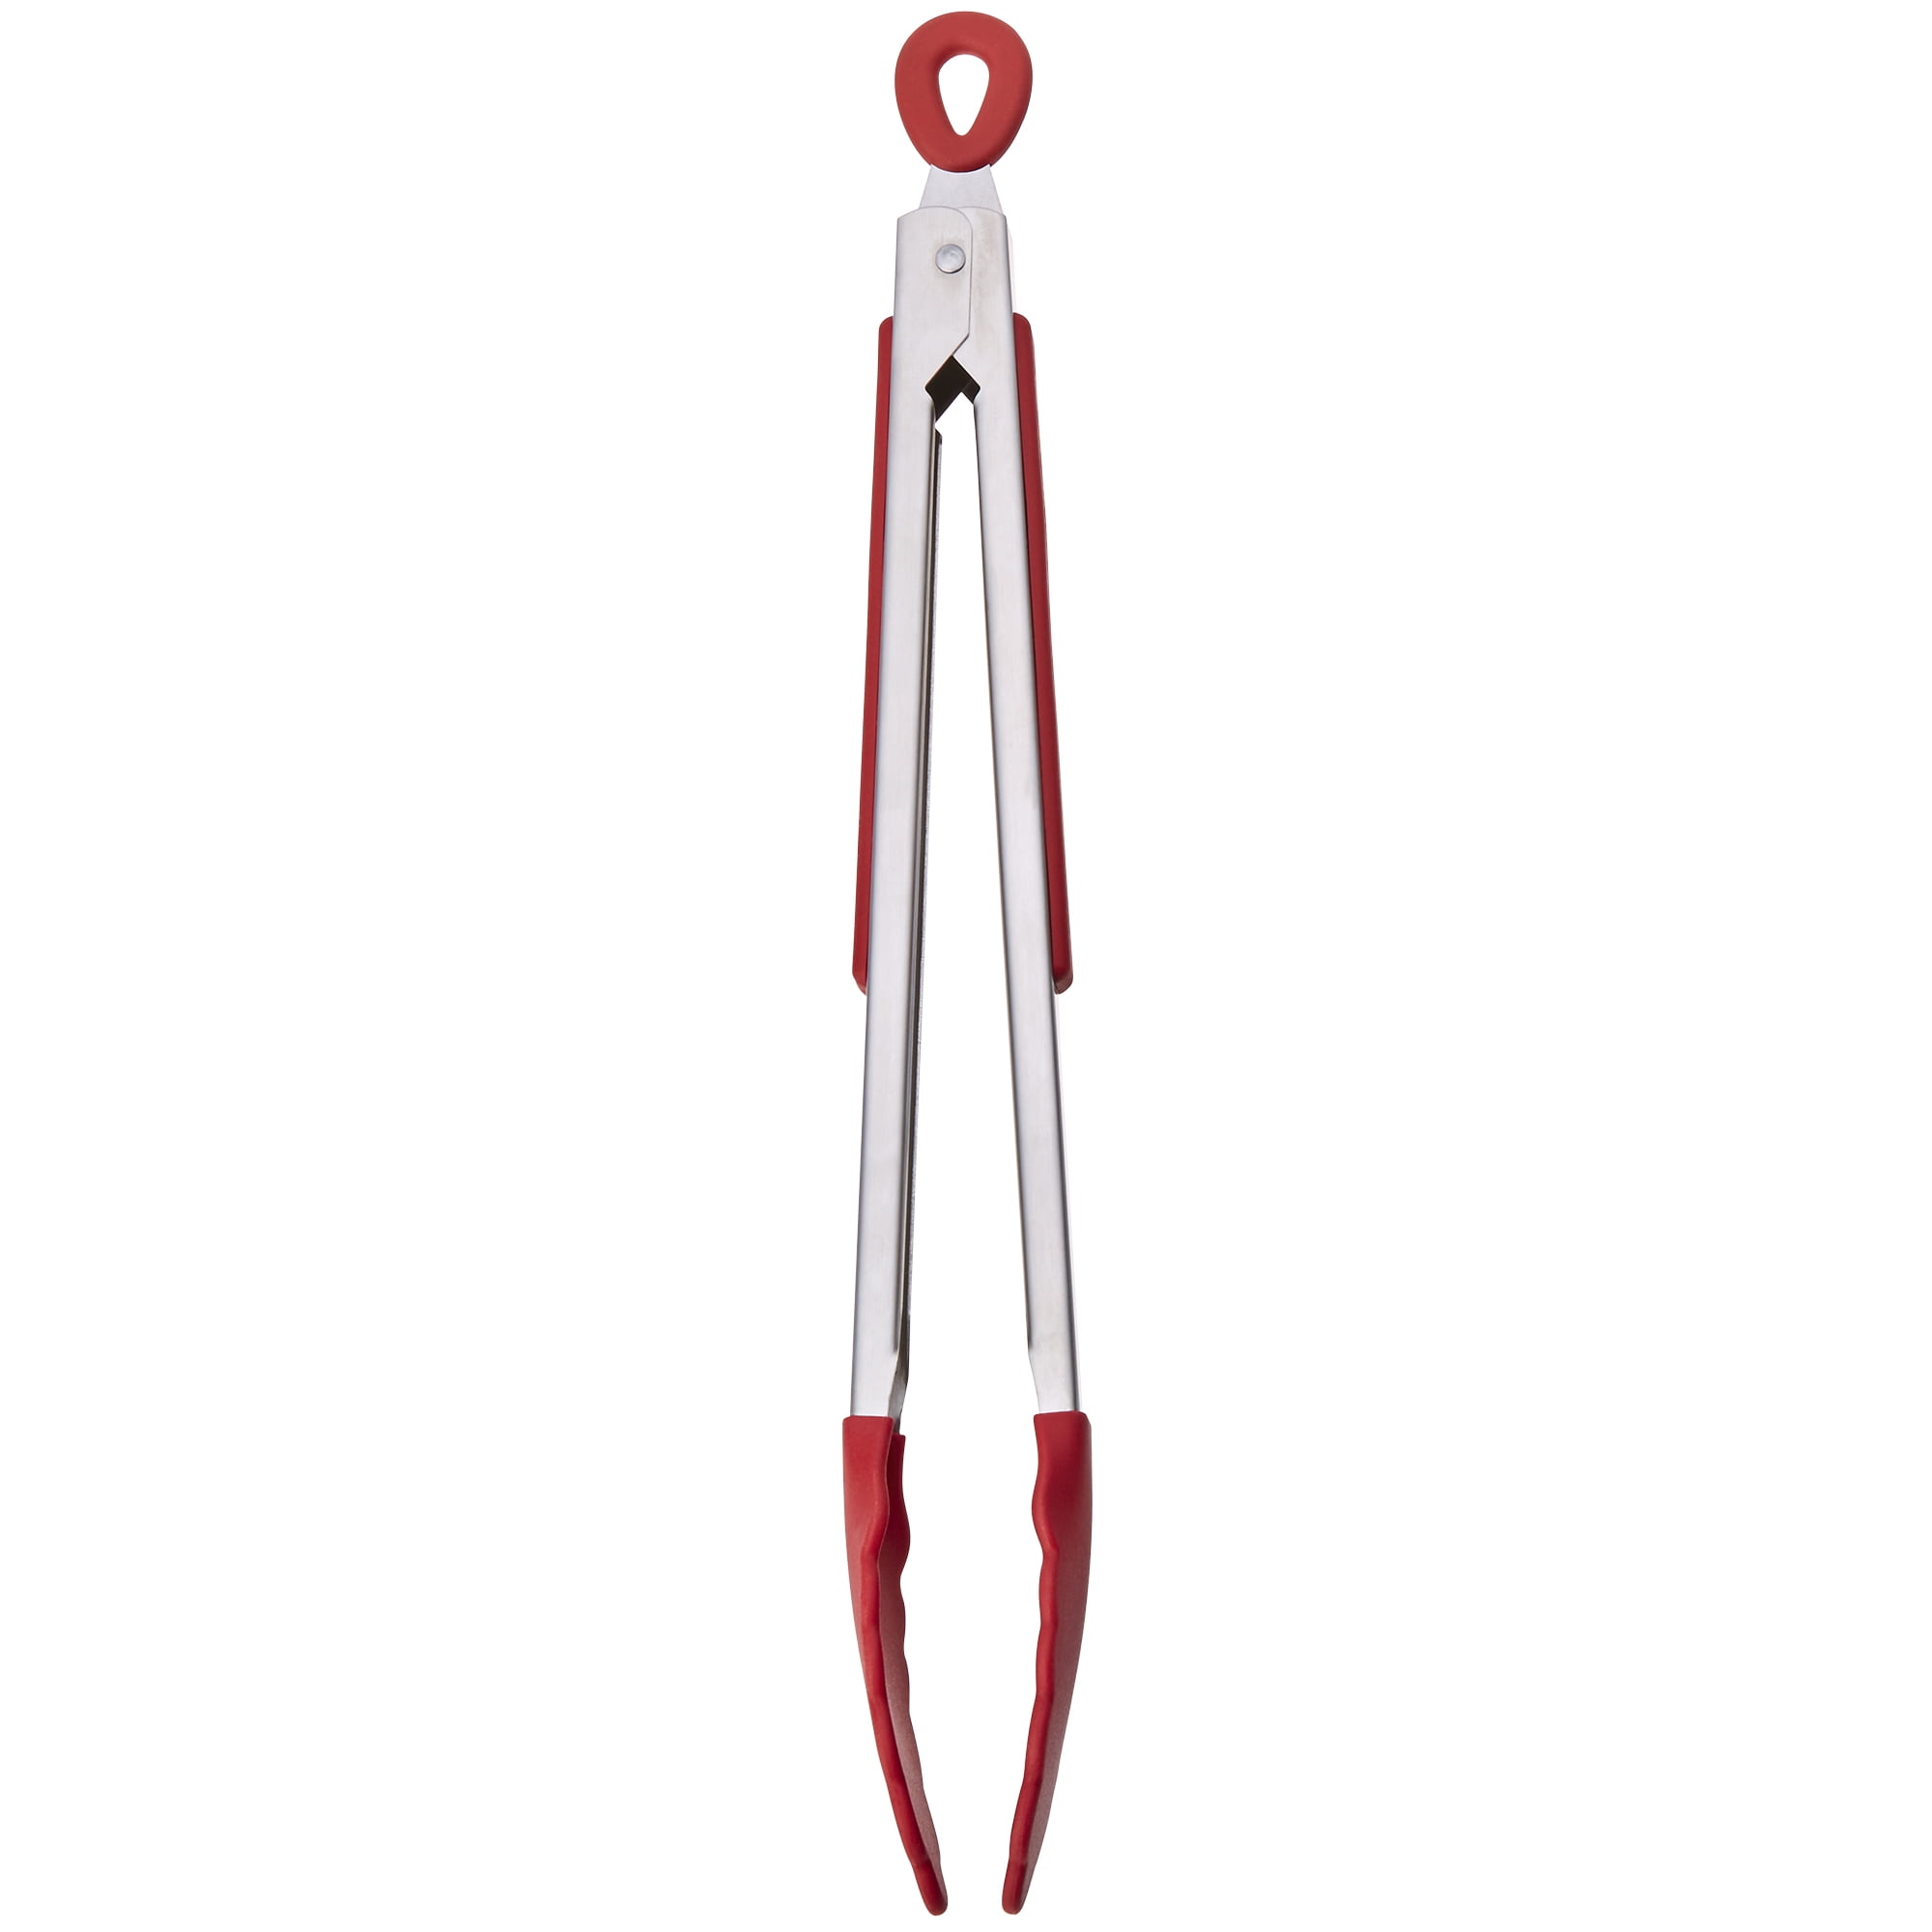 Product: Cole-Parmer Essentials Stainless Steel Tongs with Silicone Tips;  12 from Environmental Express